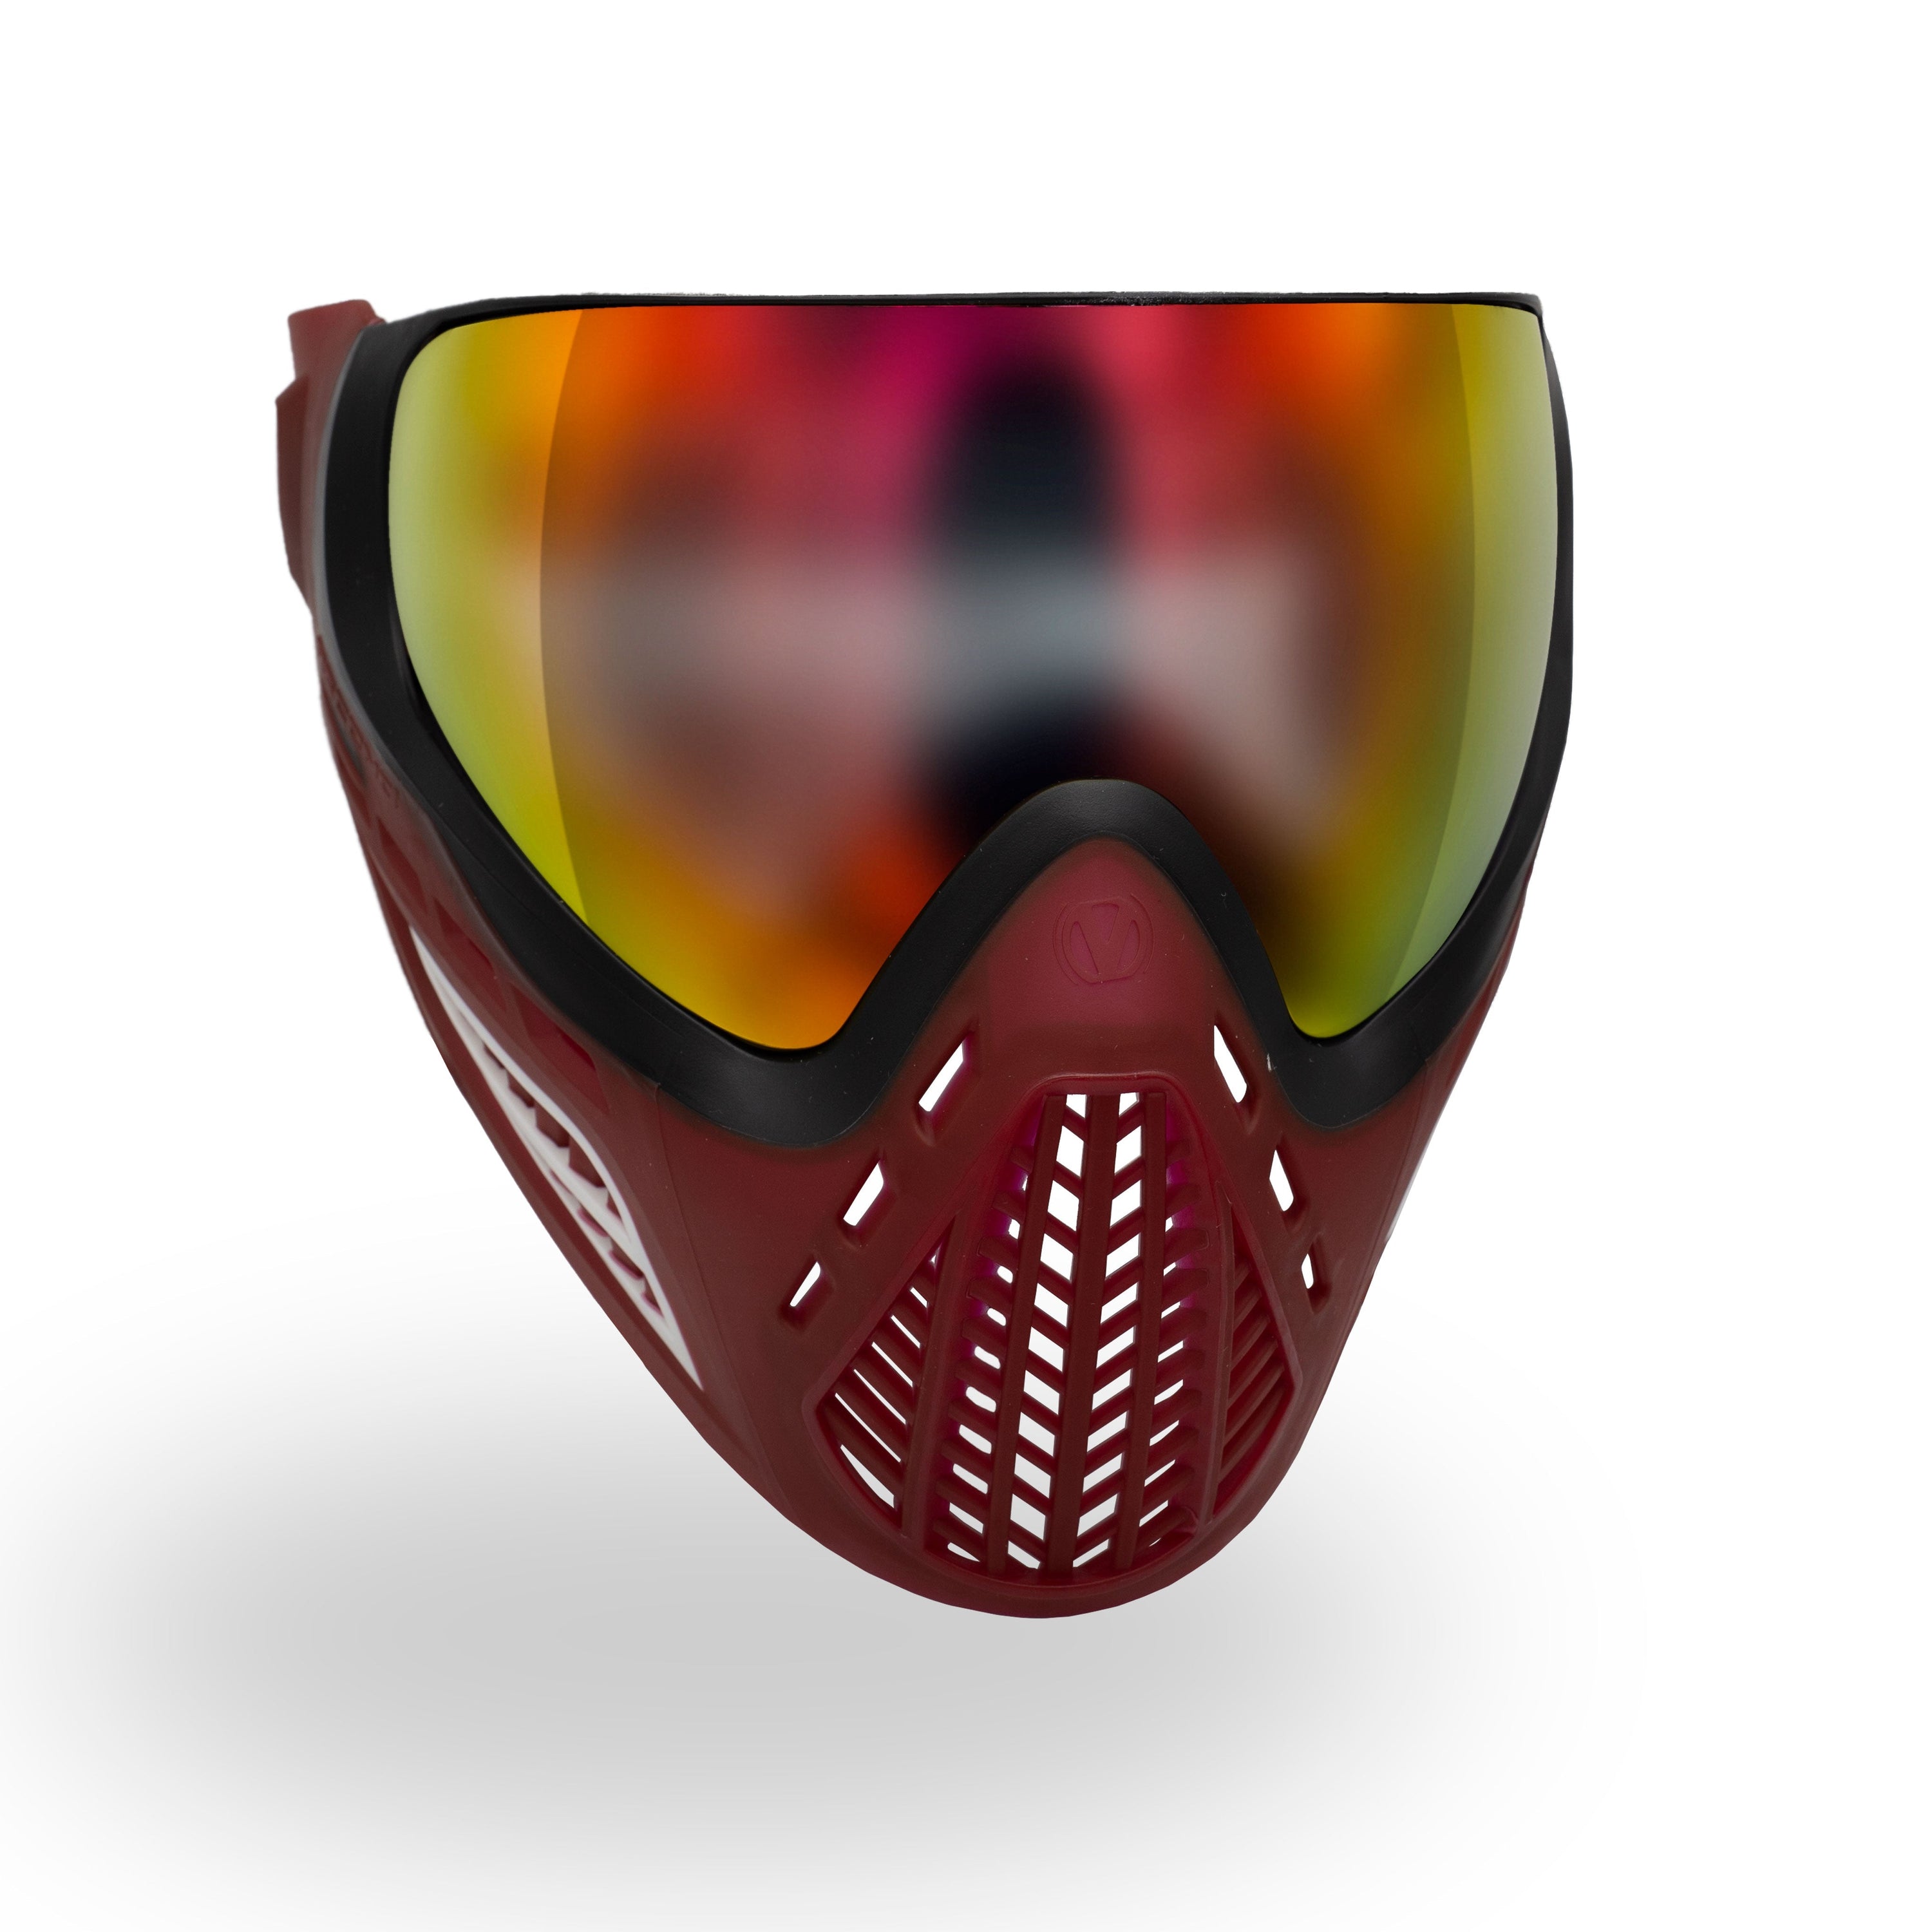 Virtue VIO Ascend Goggle - Crystal Fire - Eminent Paintball And Airsoft